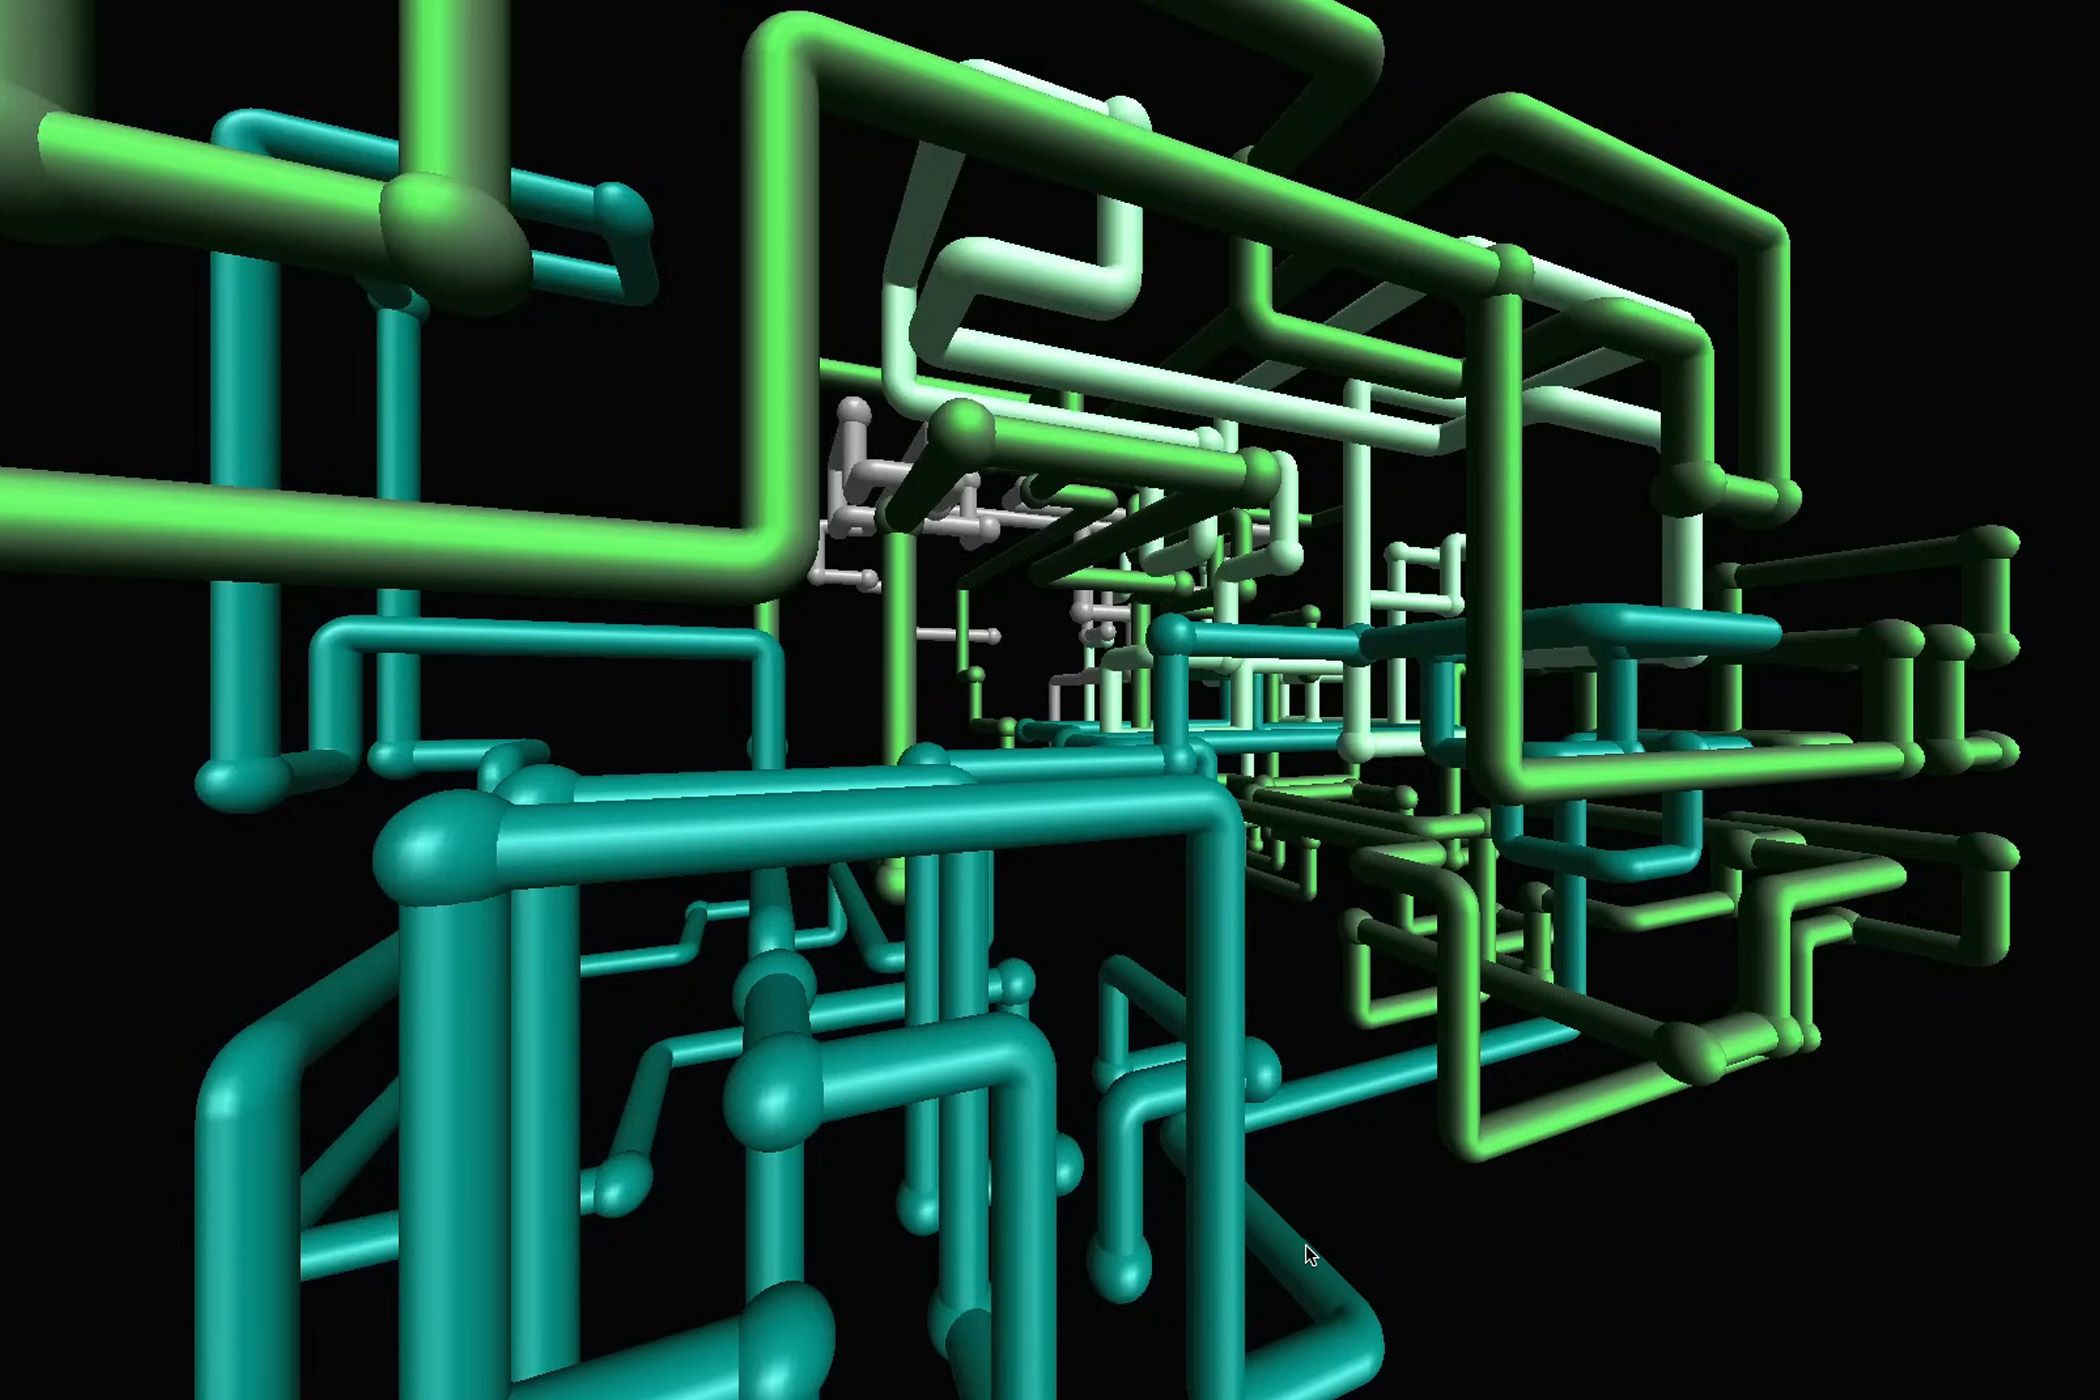 Screenshot of 3D rendered pipes on a dark background.